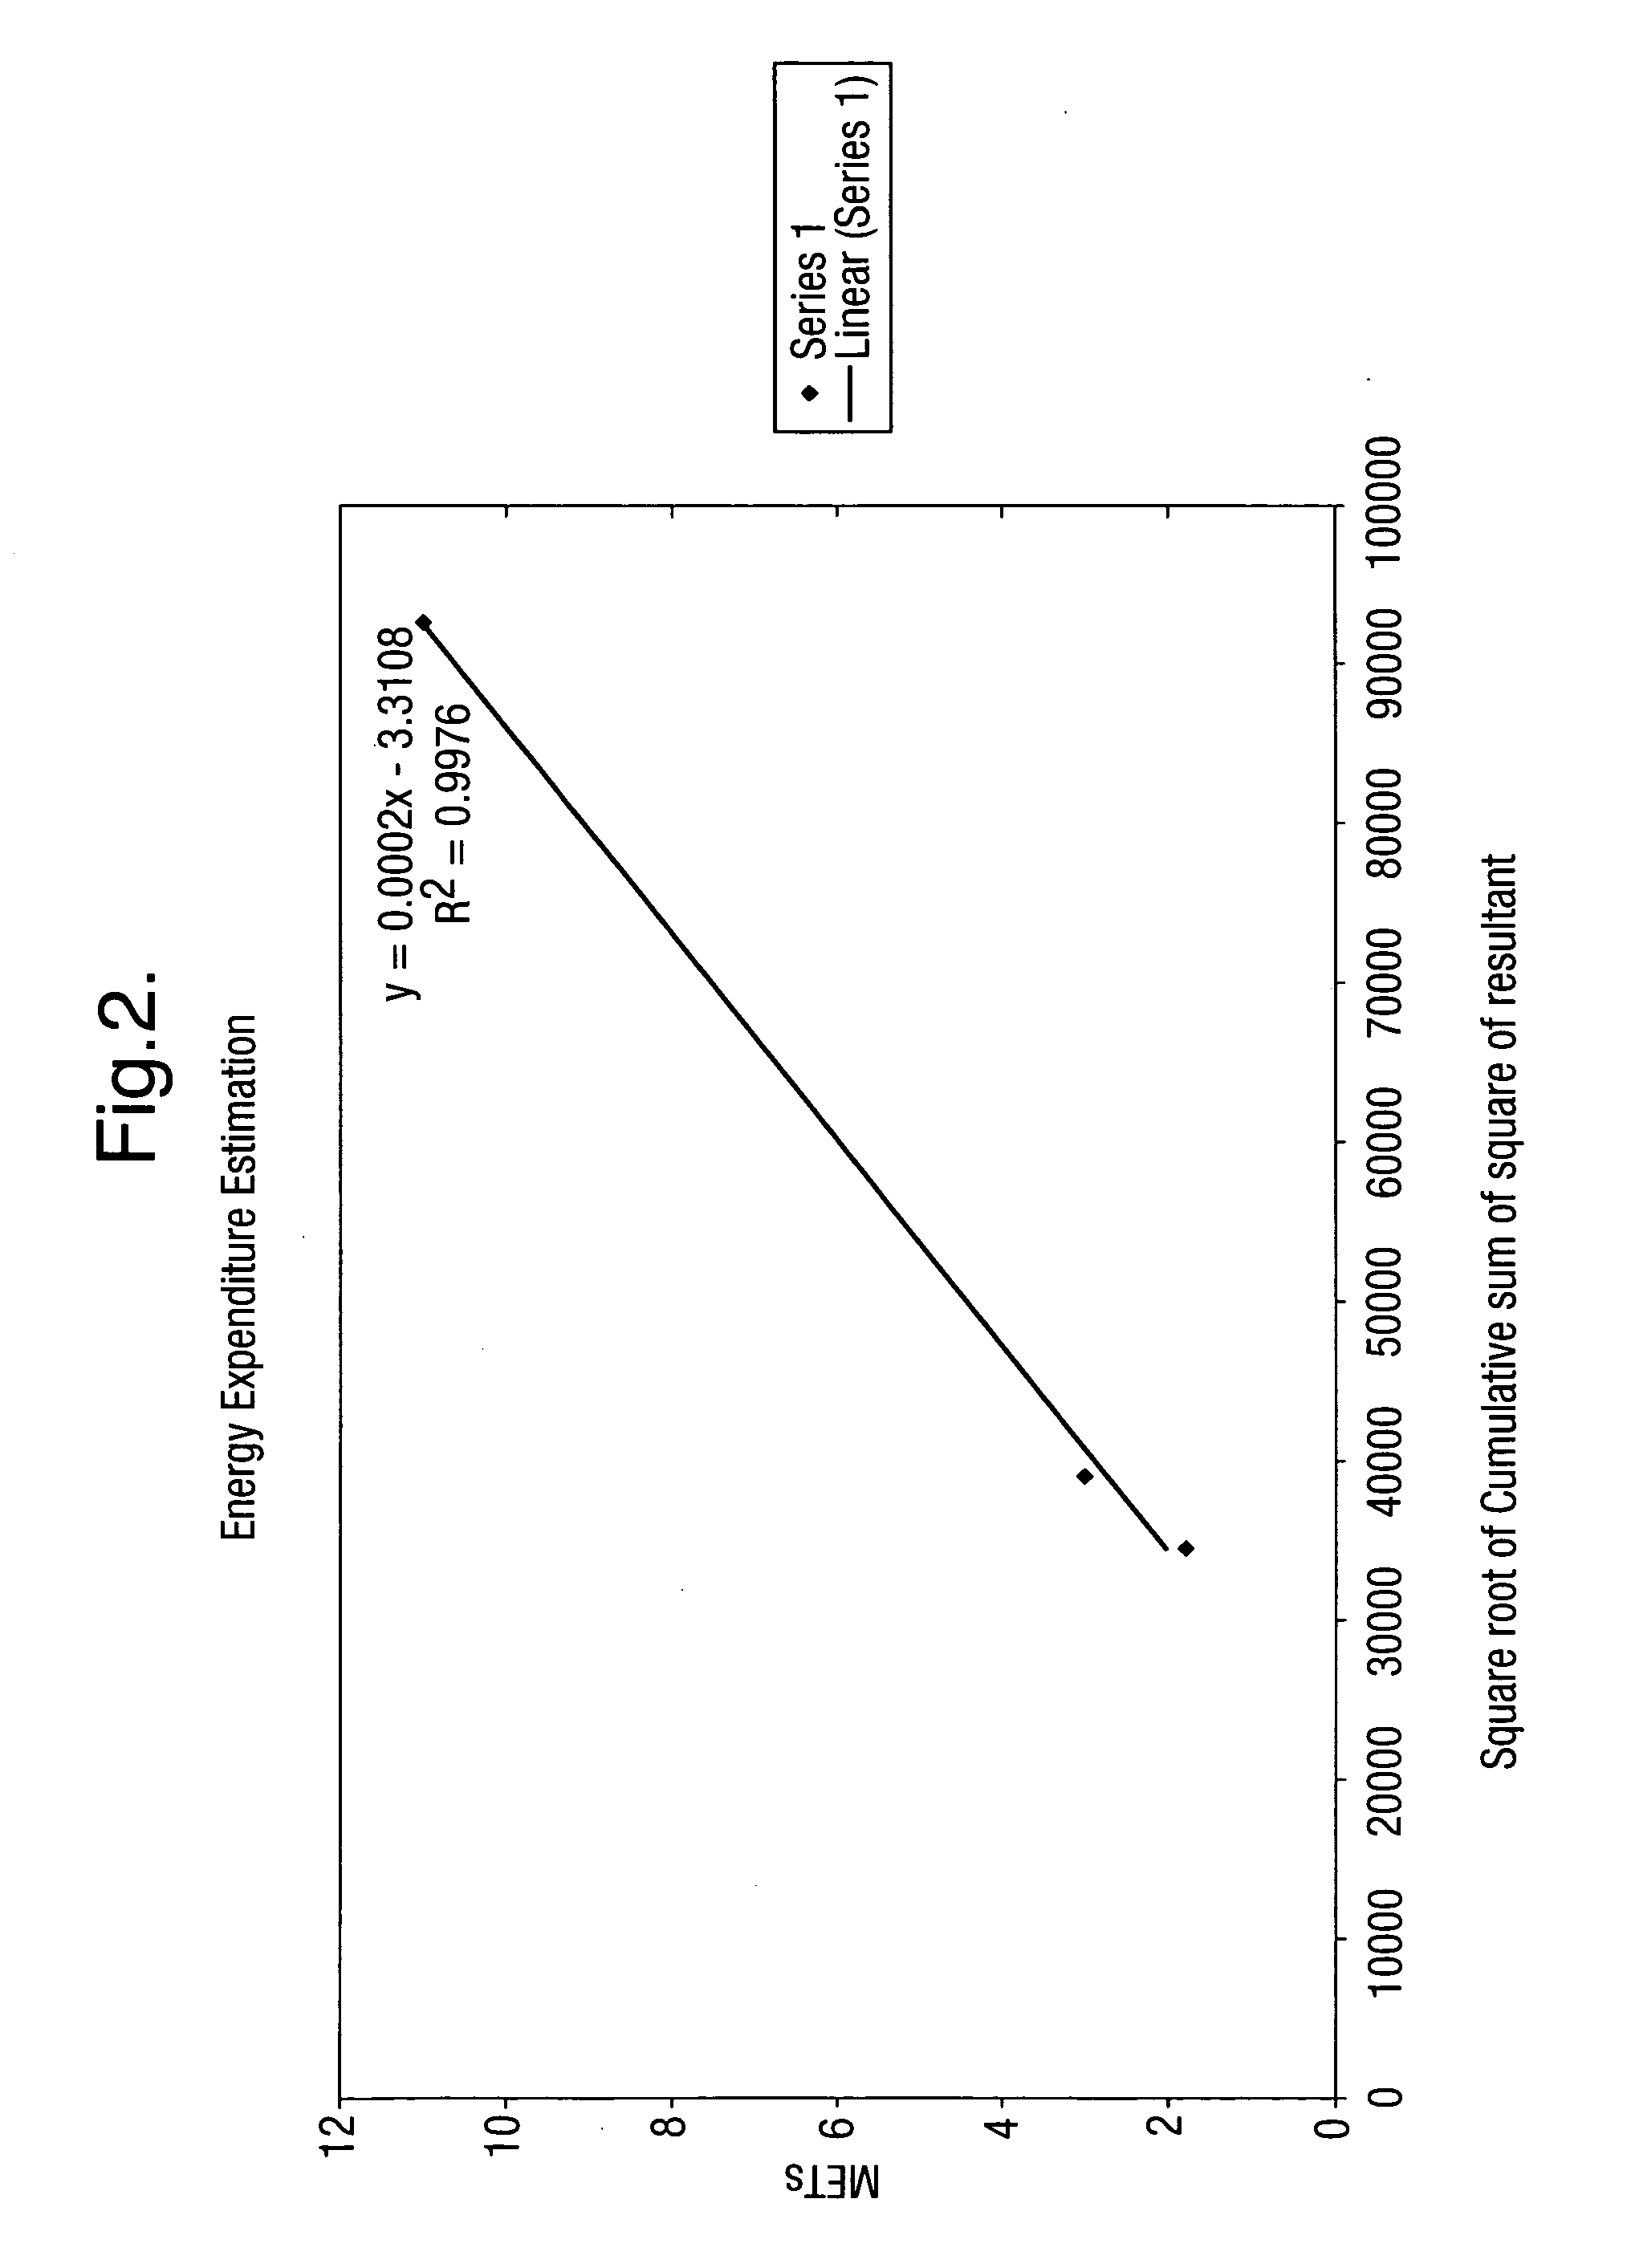 Monitor device and use thereof